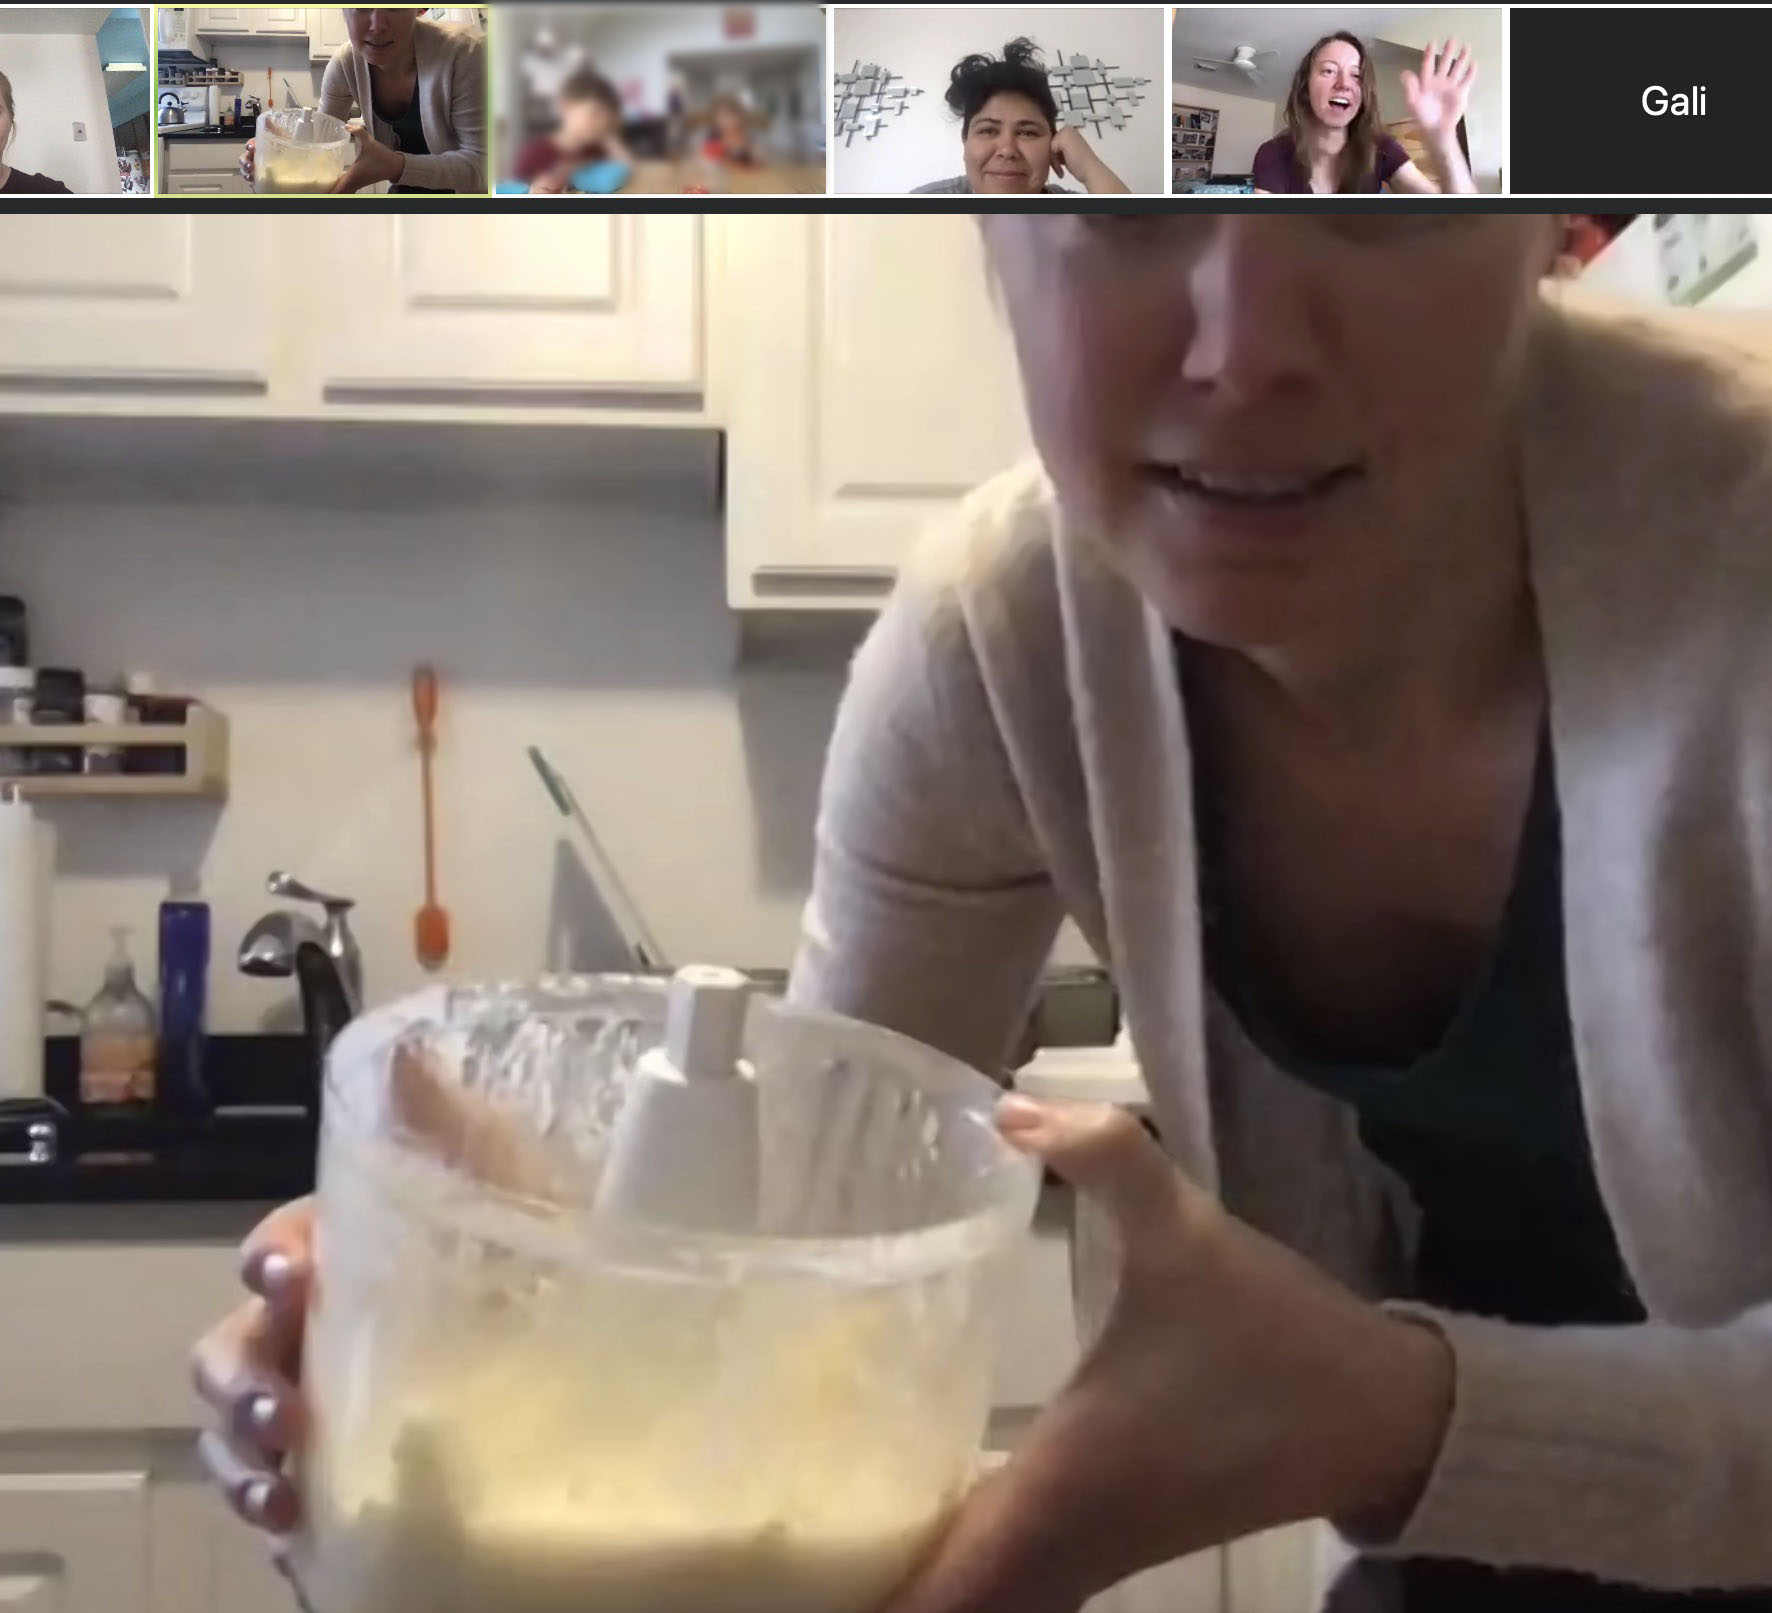 Kathryn shows us how to make butter via Zoom